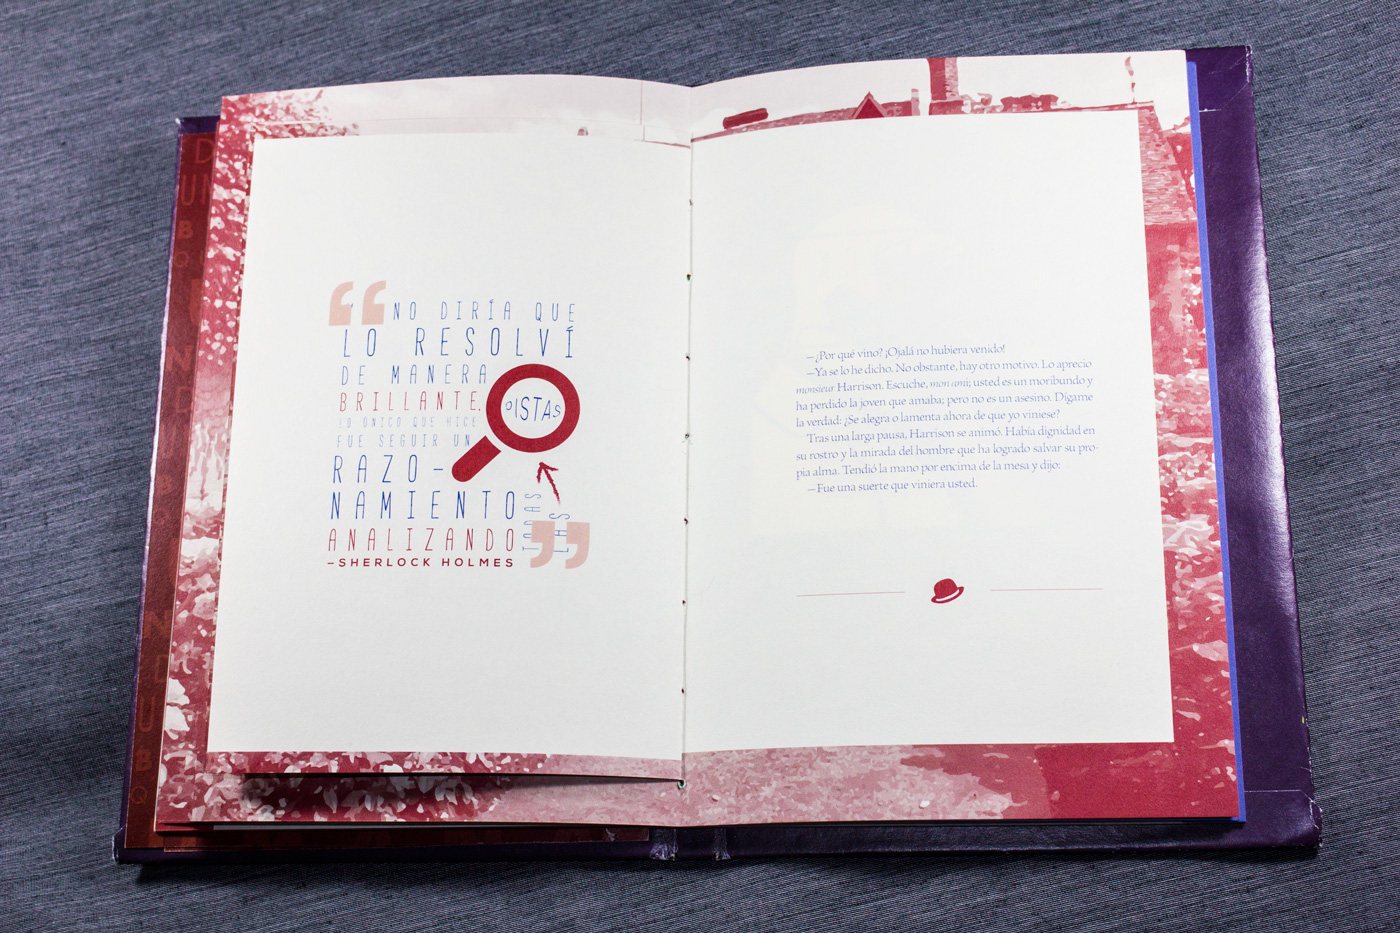 editorial detectives text design typography   typo book proyect student